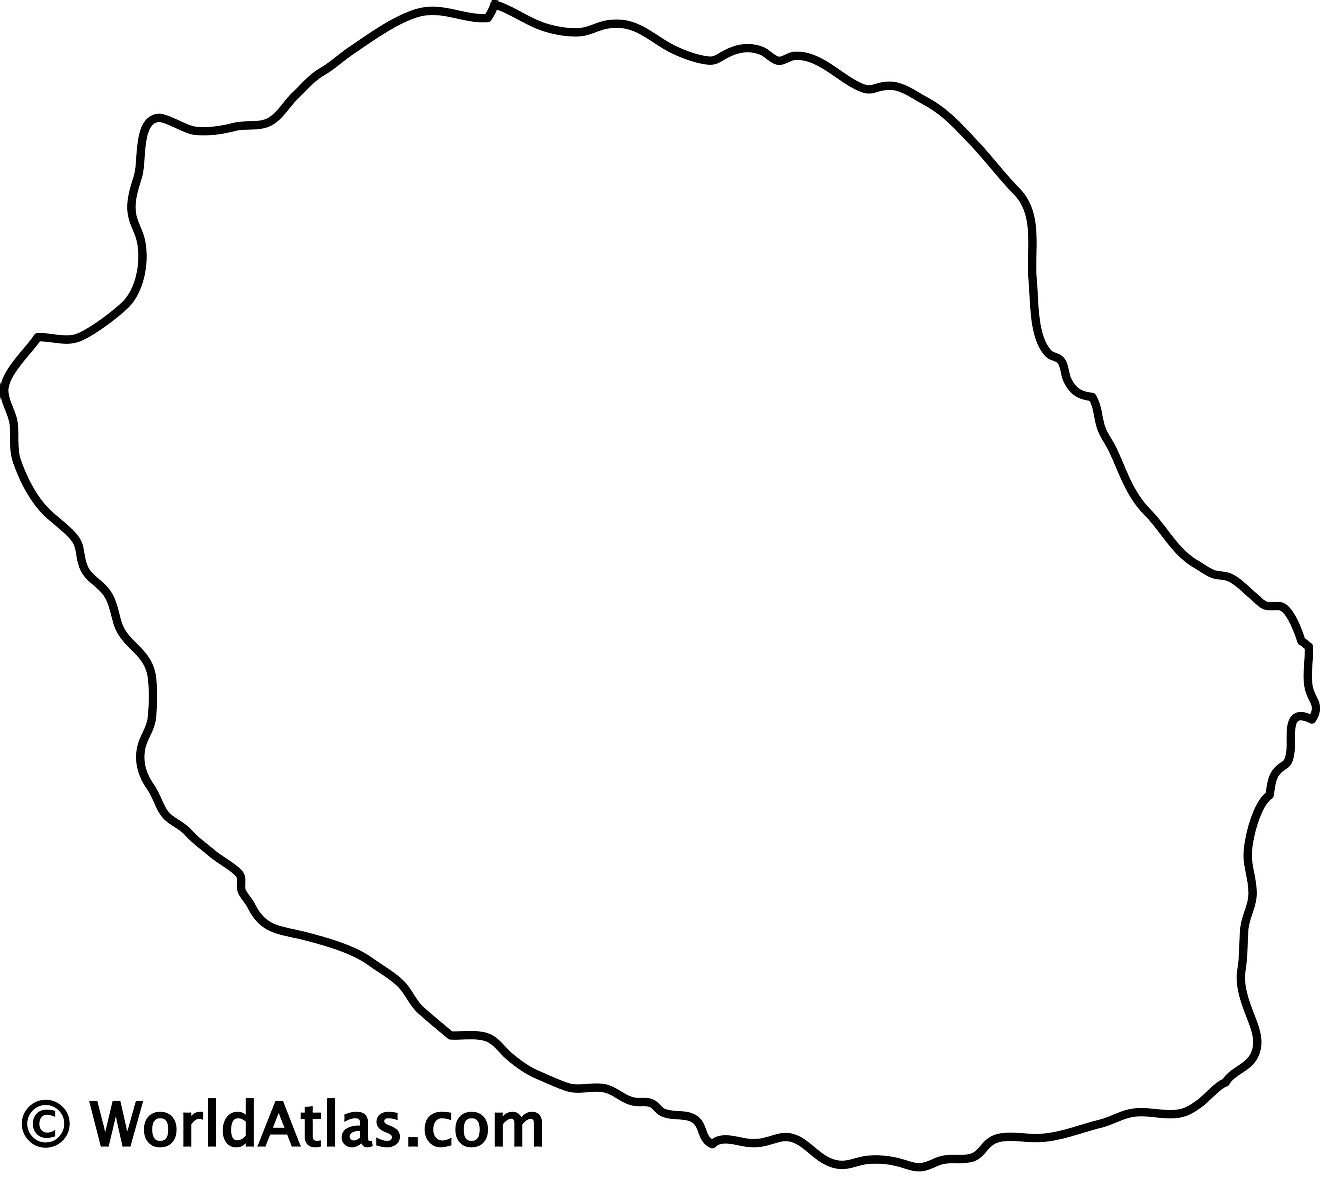 Blank outline map of Reunion 